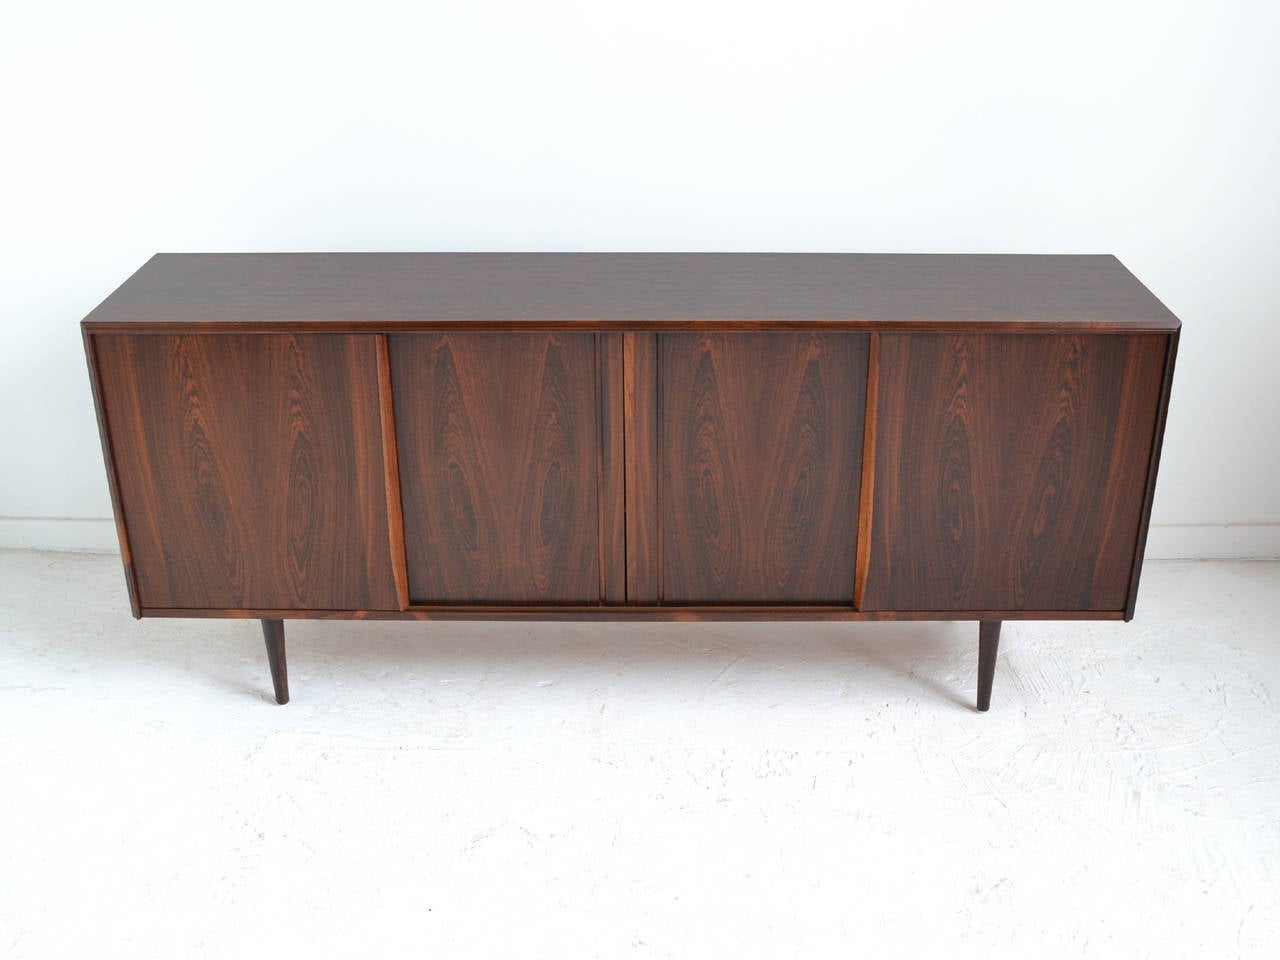 This spectacular credenza clad in rich, highly figured Brazilian rosewood is loaded with subtle details. The fine craftsmanship is evident everywhere you look: the sculpted edge and door pulls, the dovetailed drawers and mirror-lined cabinet. The